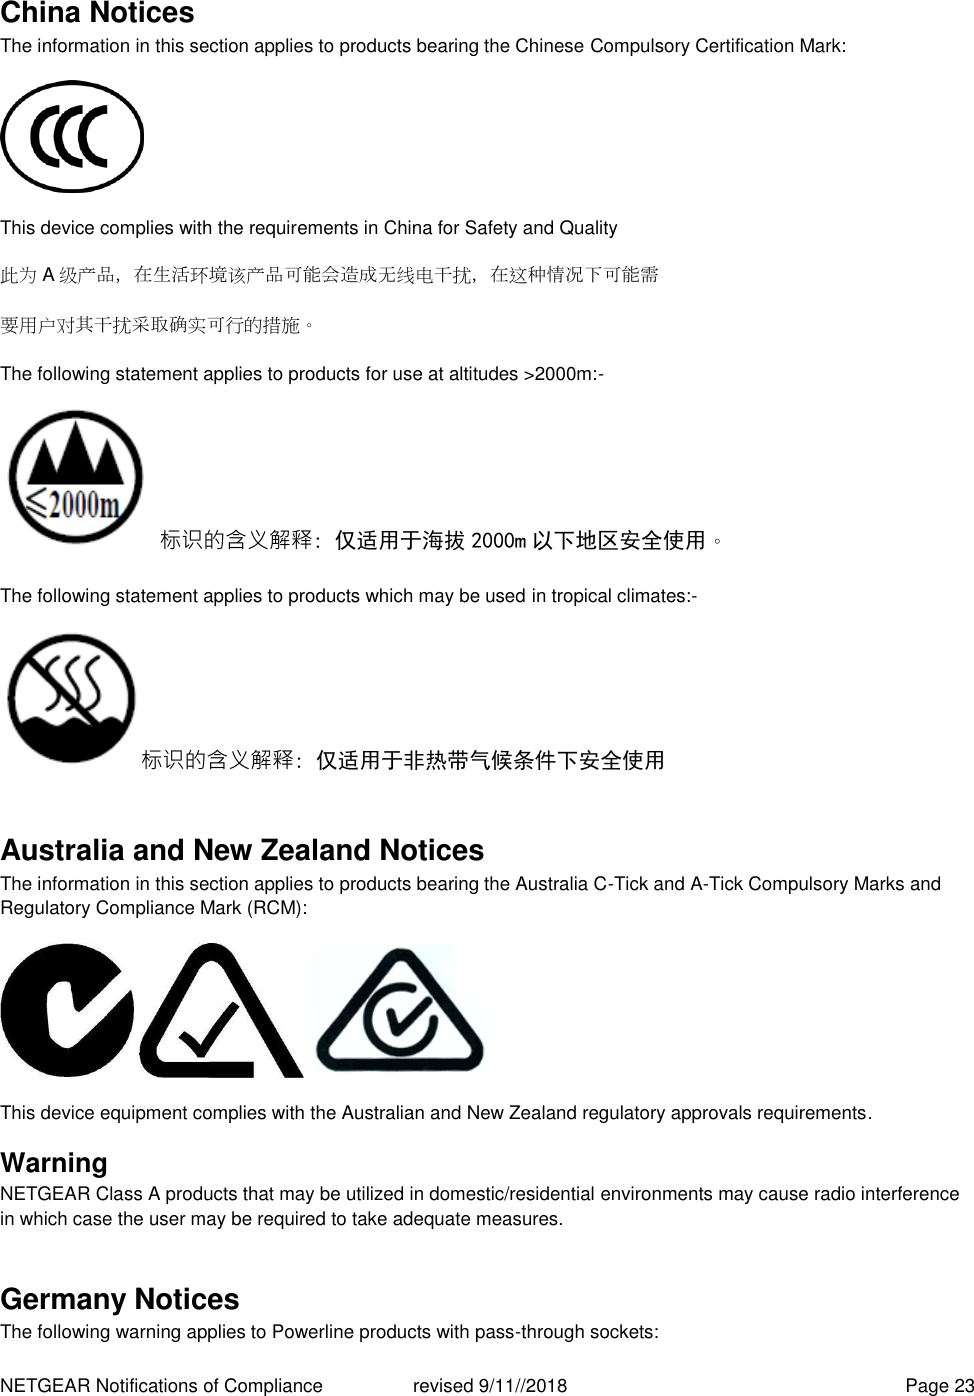 NETGEAR Notifications of Compliance    revised 9/11//2018  Page 23 China Notices The information in this section applies to products bearing the Chinese Compulsory Certification Mark:  This device complies with the requirements in China for Safety and Quality 此为A级产品，在生活环境该产品可能会造成无线电干扰，在这种情况下可能需 要用户对其干扰采取确实可行的措施。 The following statement applies to products for use at altitudes &gt;2000m:- 标识的含义解释: 仅适用于海拔 2000m 以下地区安全使用。 The following statement applies to products which may be used in tropical climates:- 标识的含义解释: 仅适用于非热带气候条件下安全使用 Australia and New Zealand Notices The information in this section applies to products bearing the Australia C-Tick and A-Tick Compulsory Marks and Regulatory Compliance Mark (RCM):      This device equipment complies with the Australian and New Zealand regulatory approvals requirements. Warning NETGEAR Class A products that may be utilized in domestic/residential environments may cause radio interference in which case the user may be required to take adequate measures.  Germany Notices The following warning applies to Powerline products with pass-through sockets: 